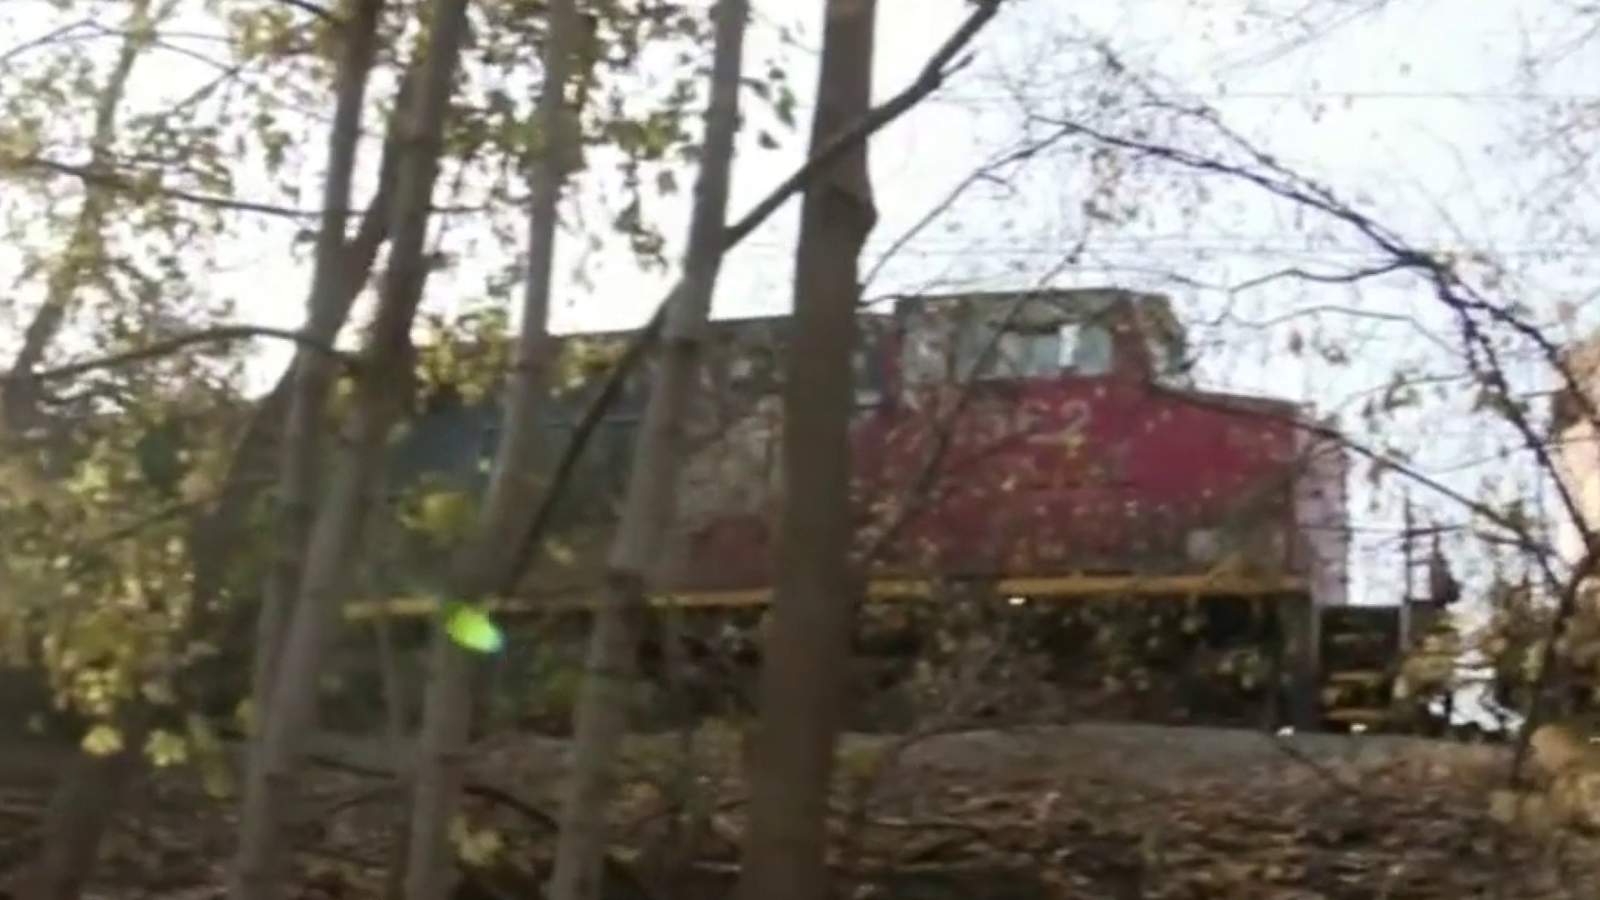 Residents dealing with loud noises from trains idling for days in Bloomfield Hills